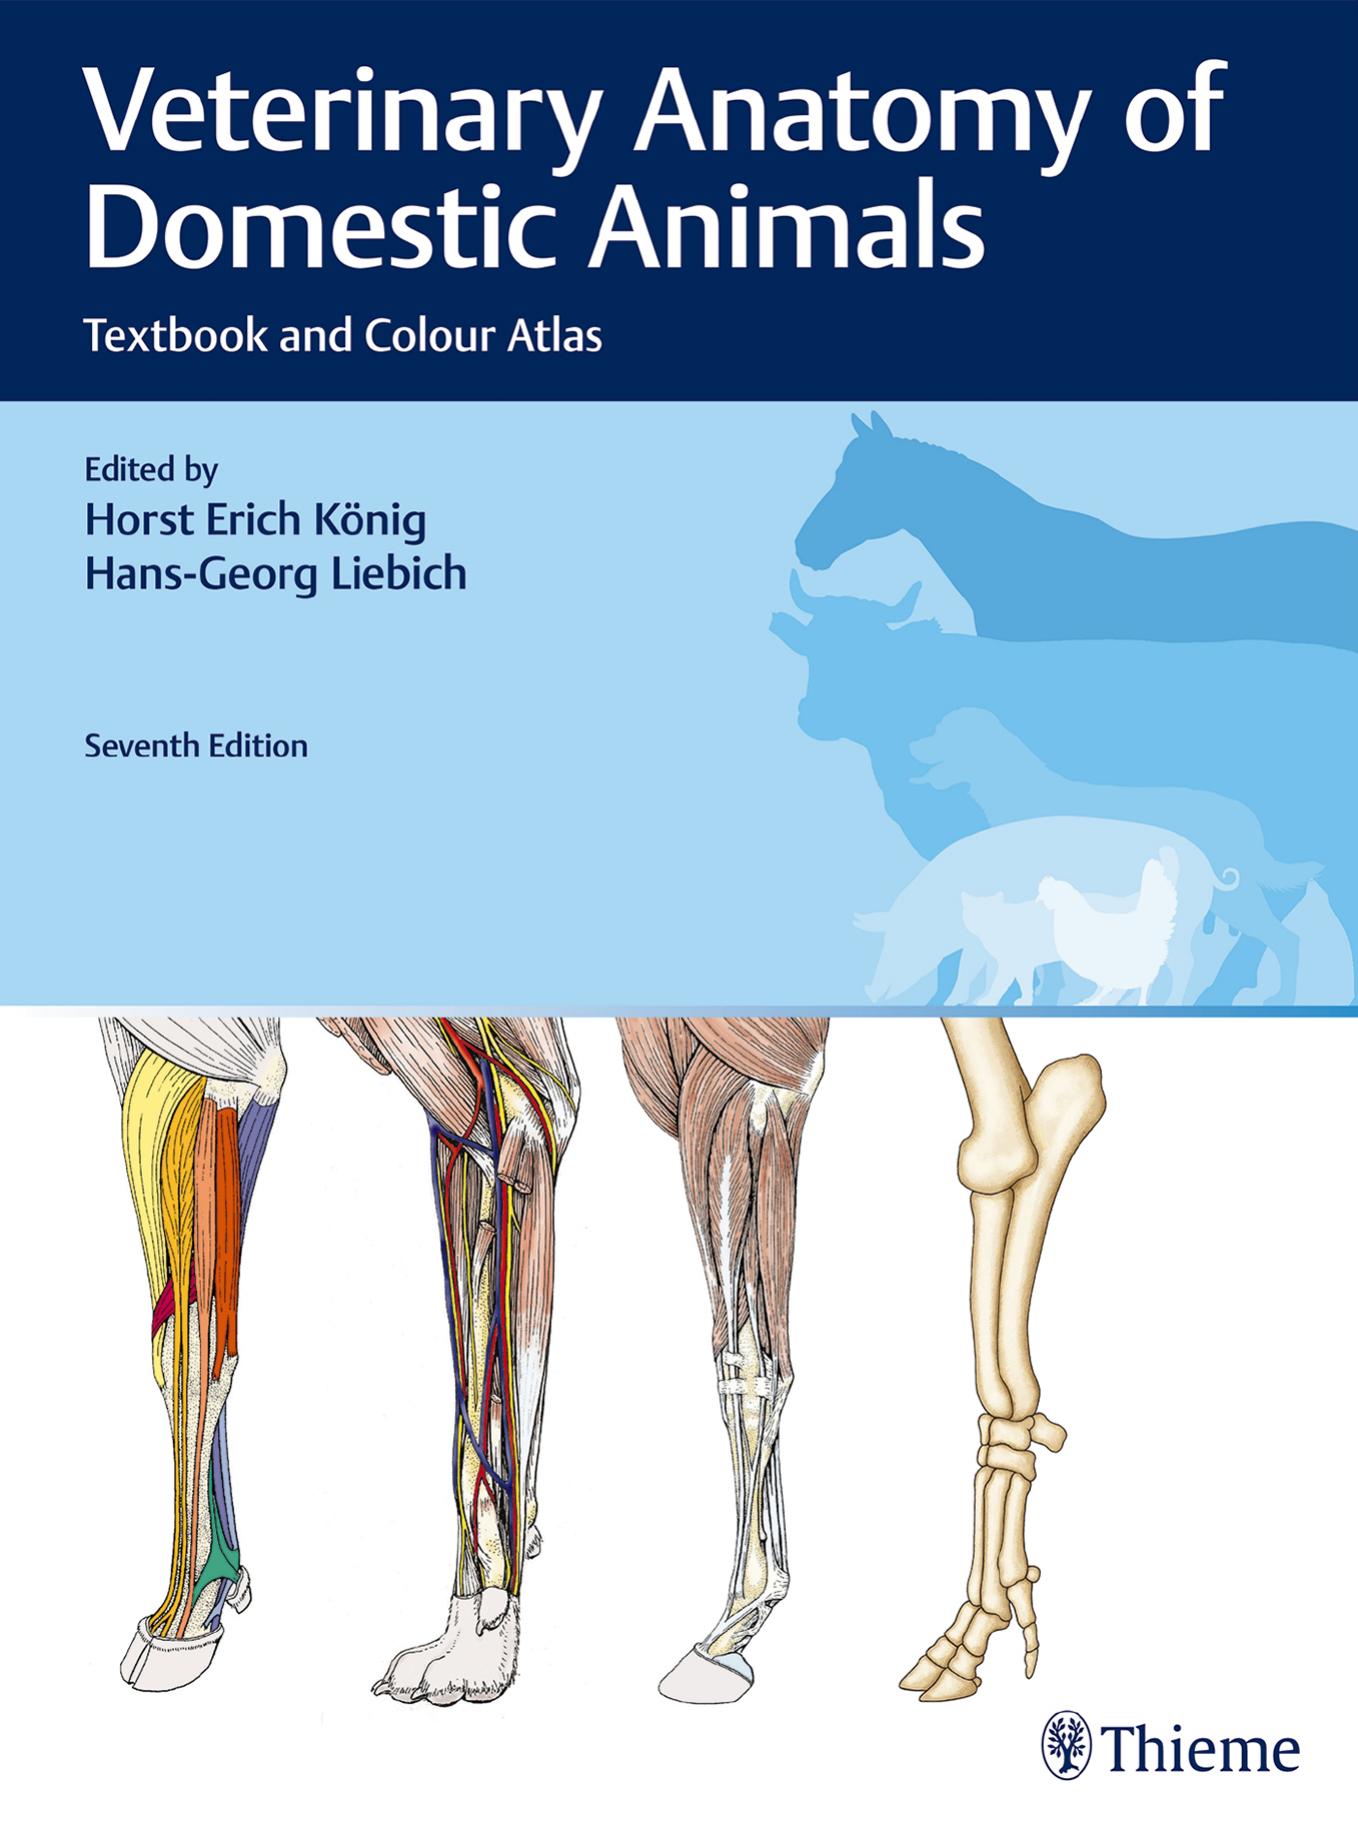 Veterinary Anatomy of Domestic Animals, Textbook and Colour Atlas, 7th Edition